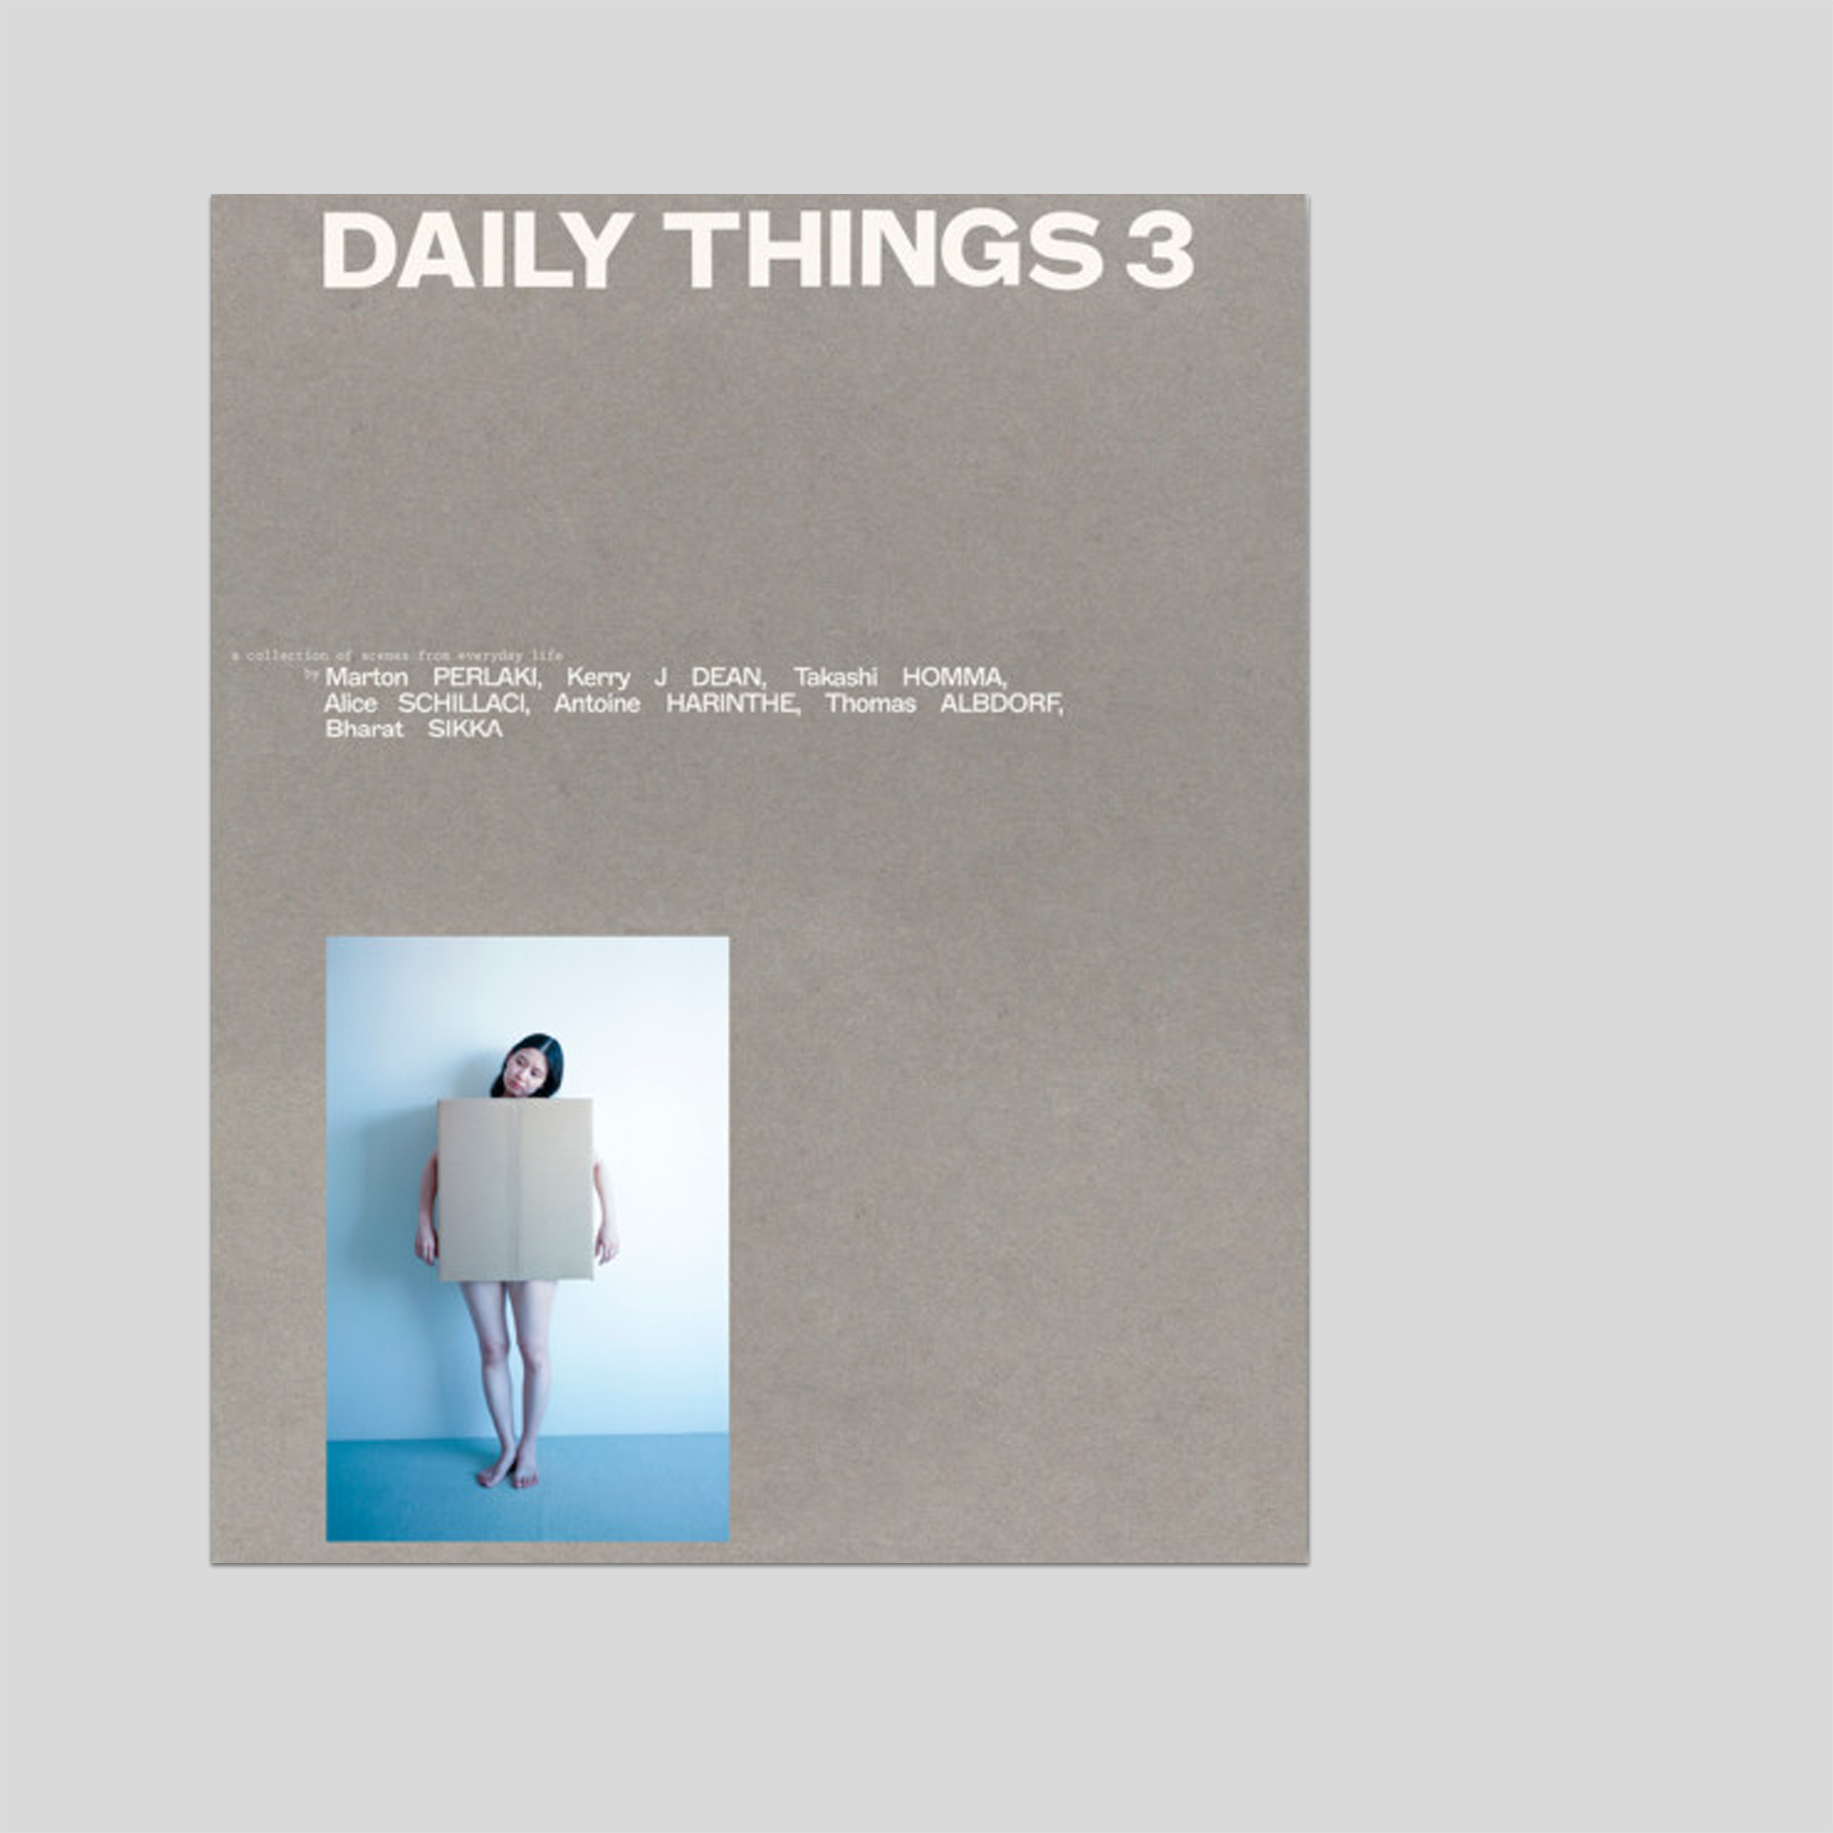 Daily things #3